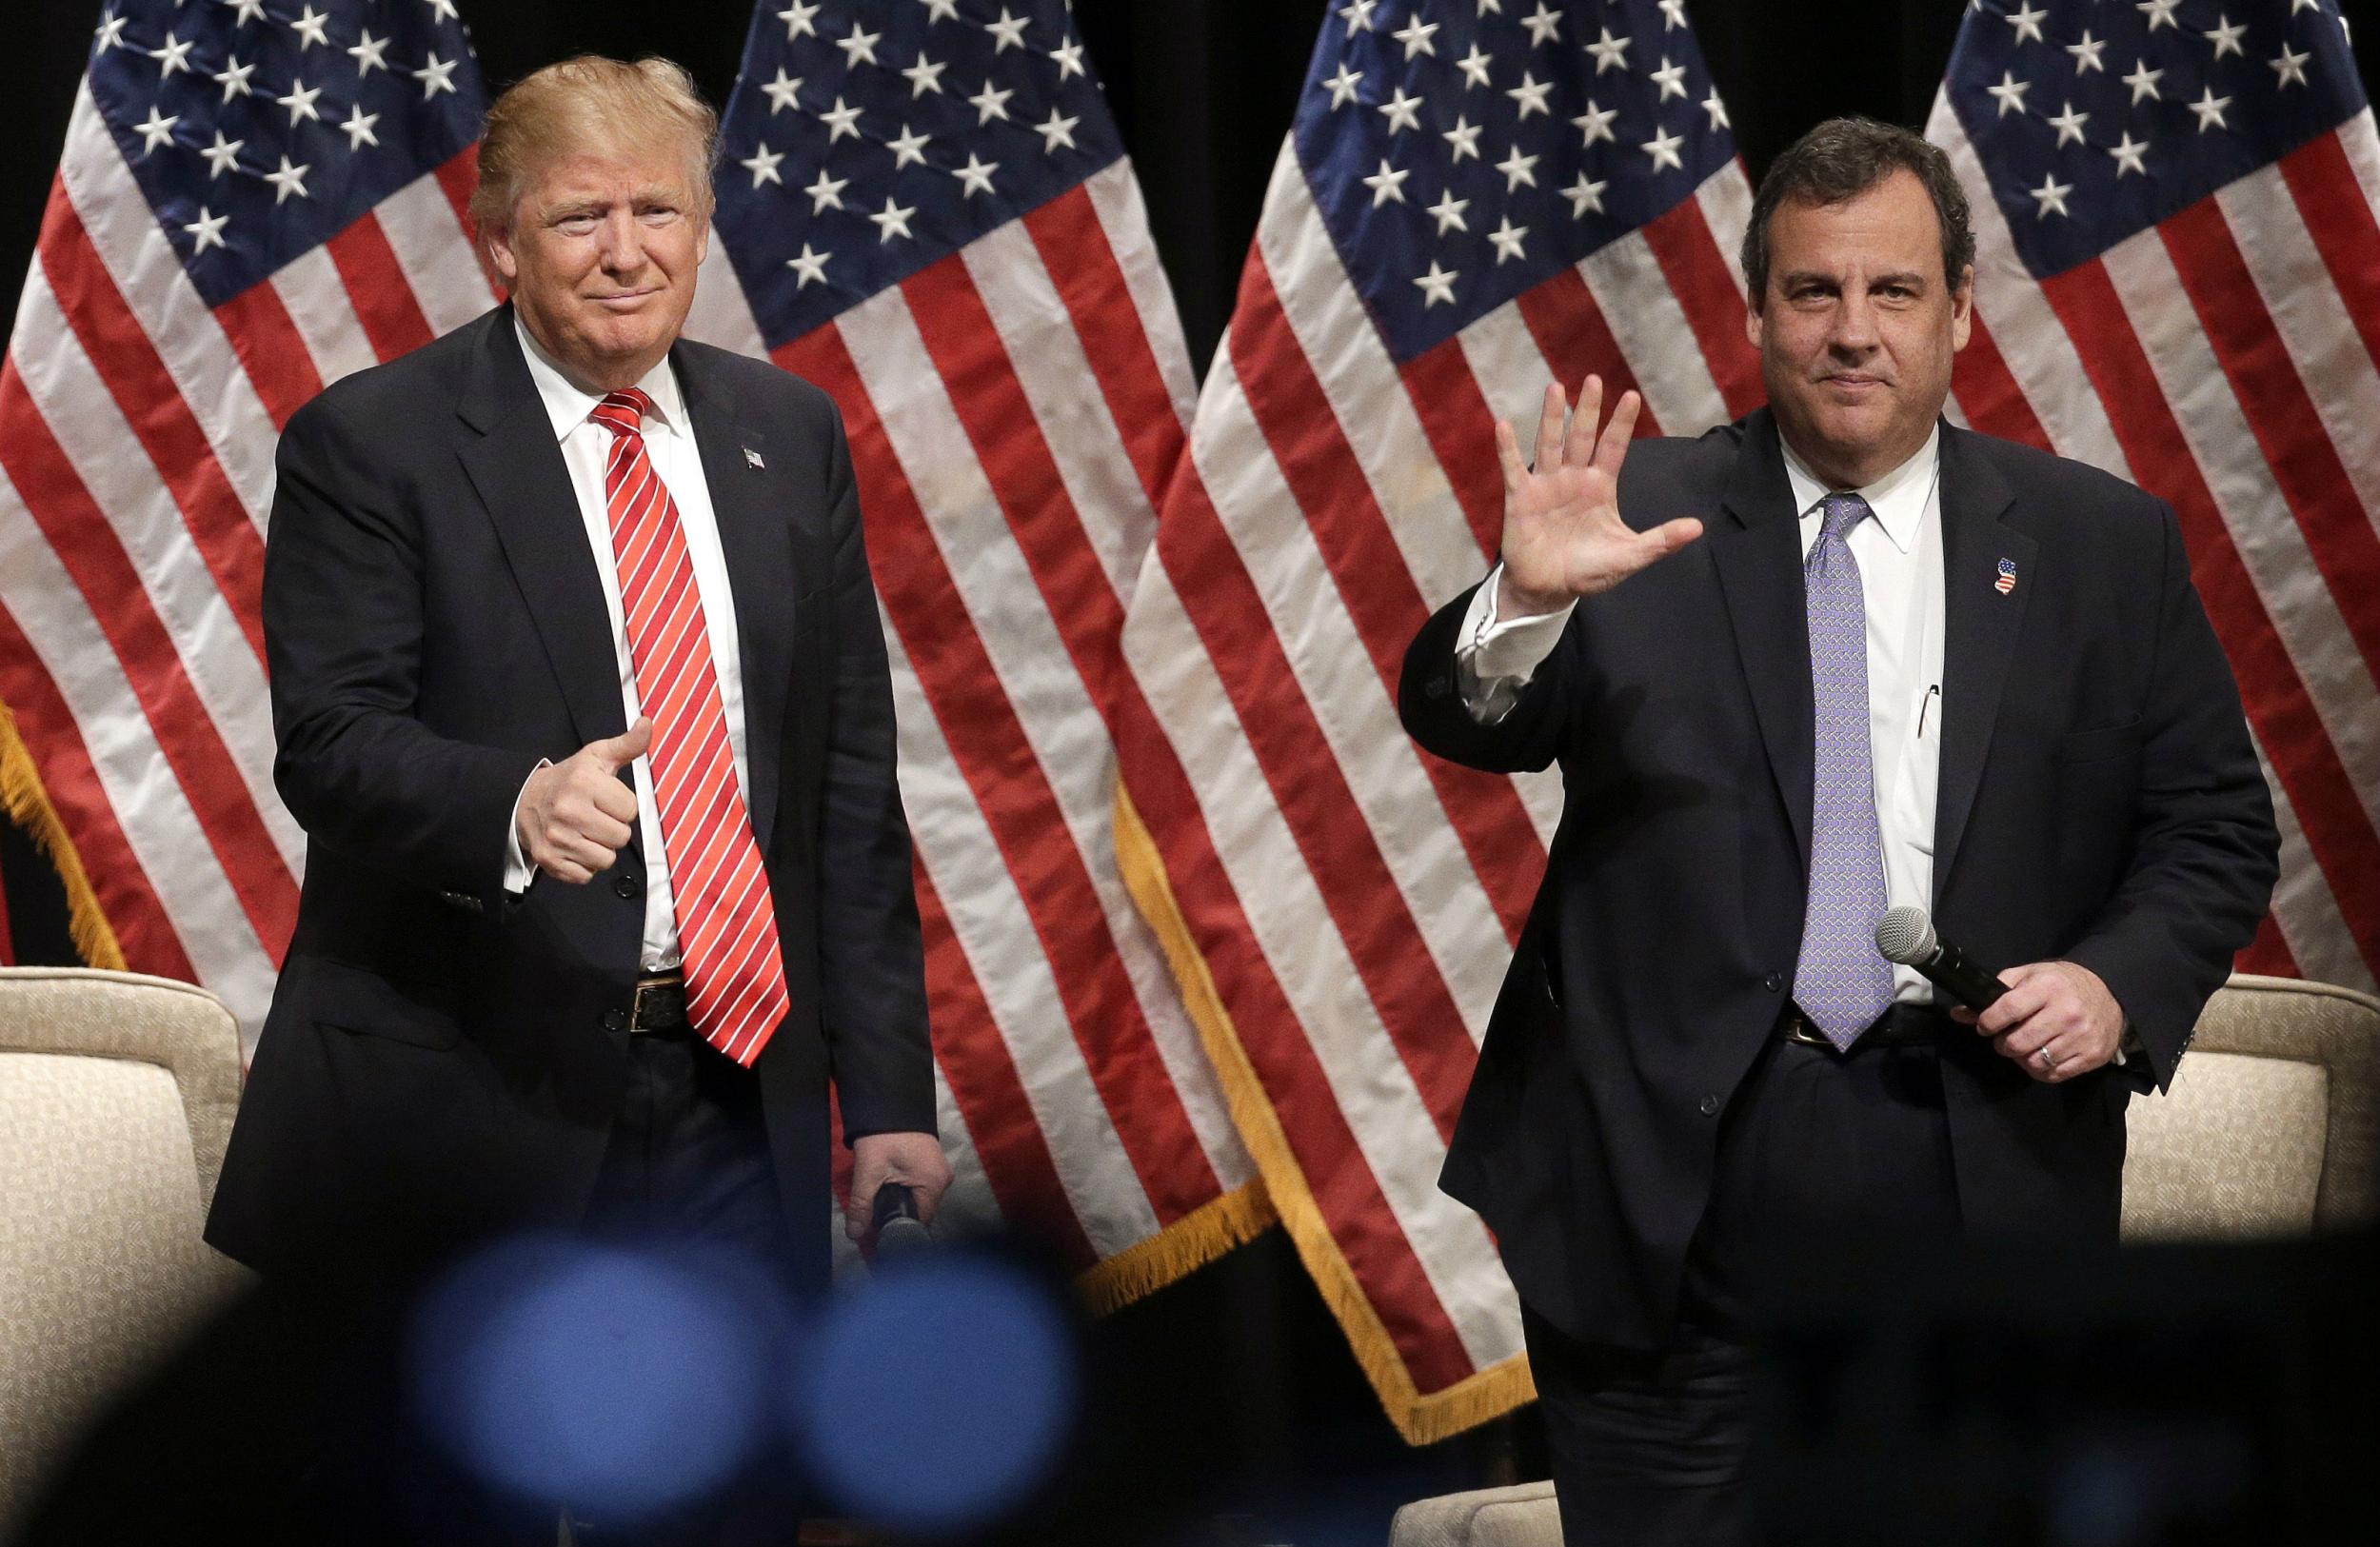 Mr Trump and Mr Christie laughed as protestors were escorted out the hall